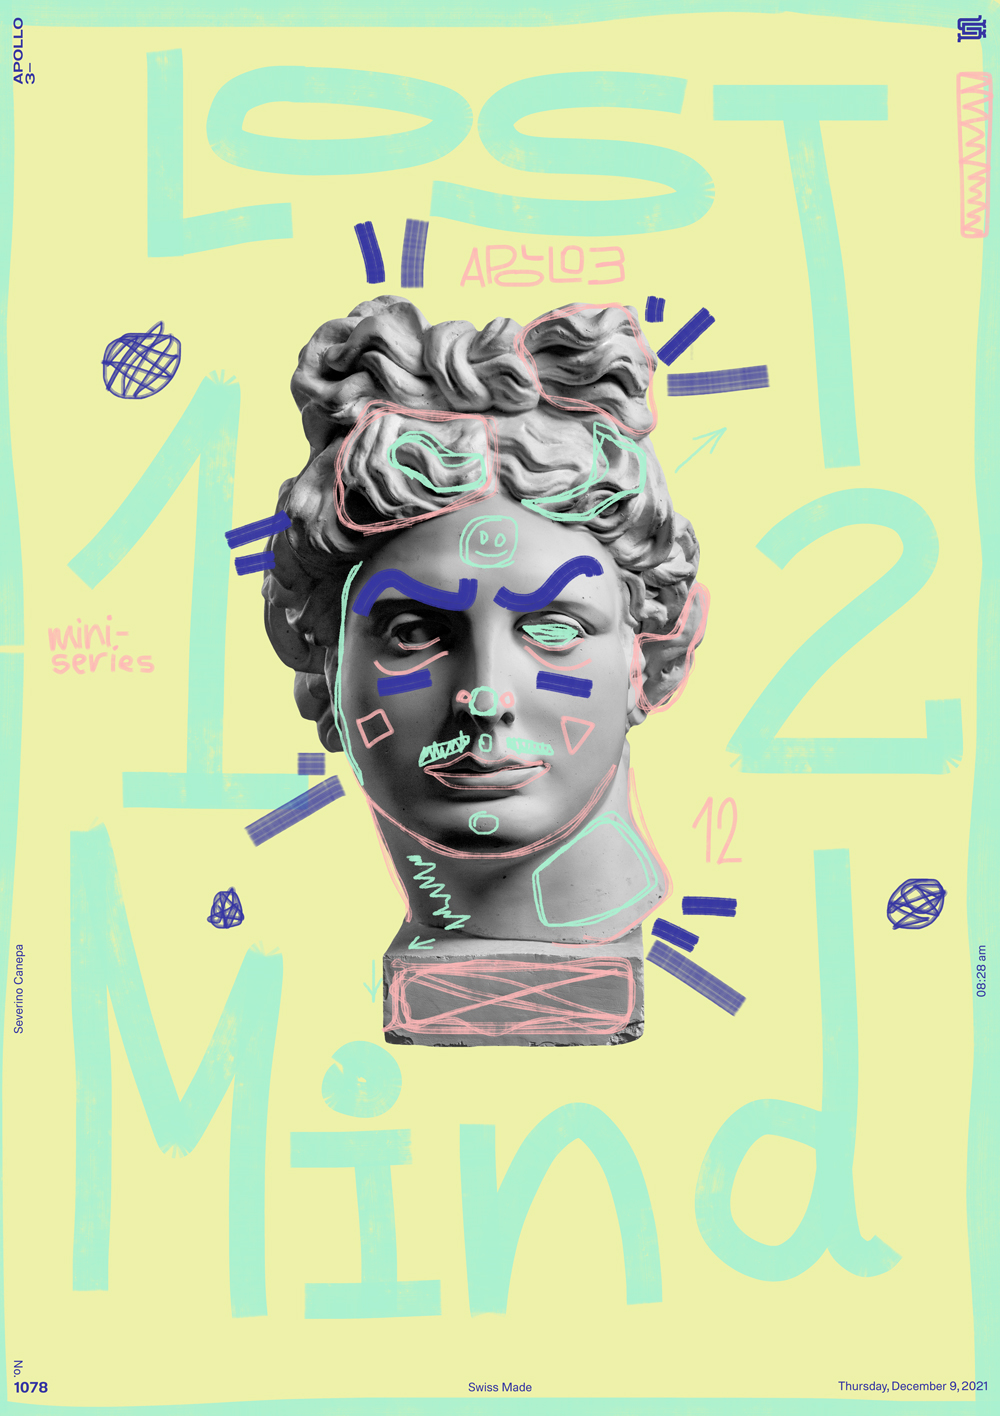 Hand-drawn digital creation I realized with brushes and Apollo's statue